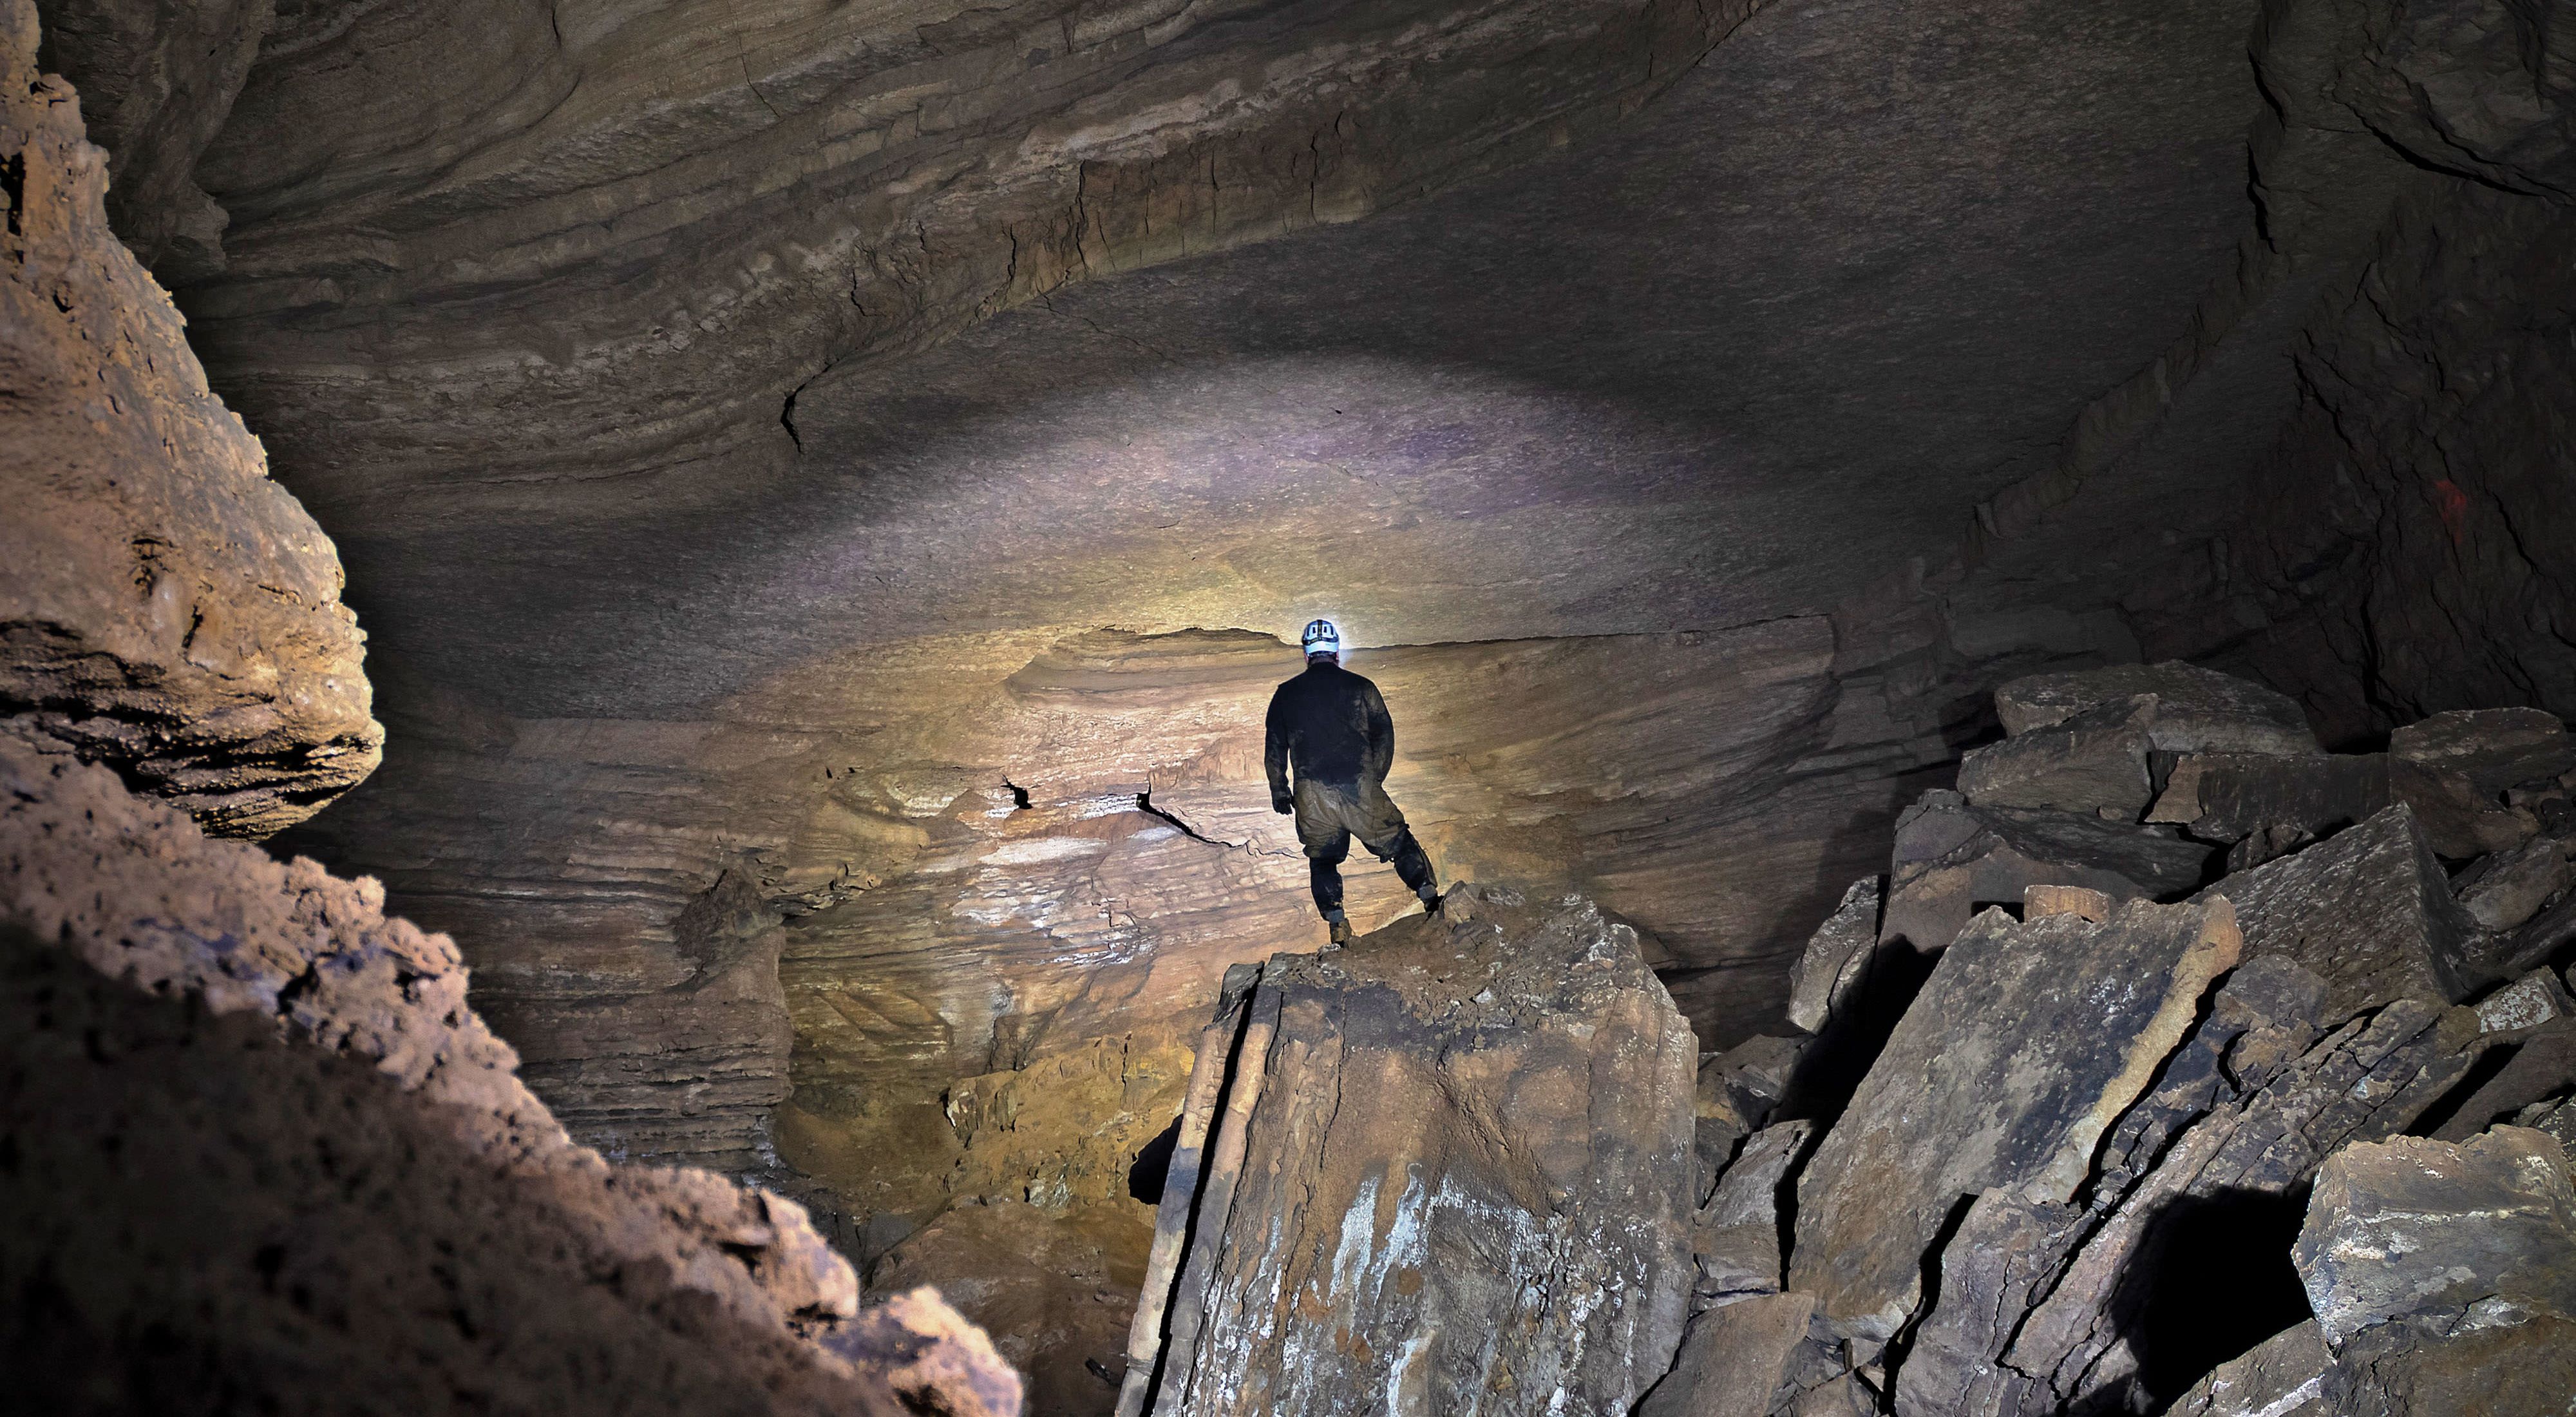 A man stands at the bottom of a large cave.